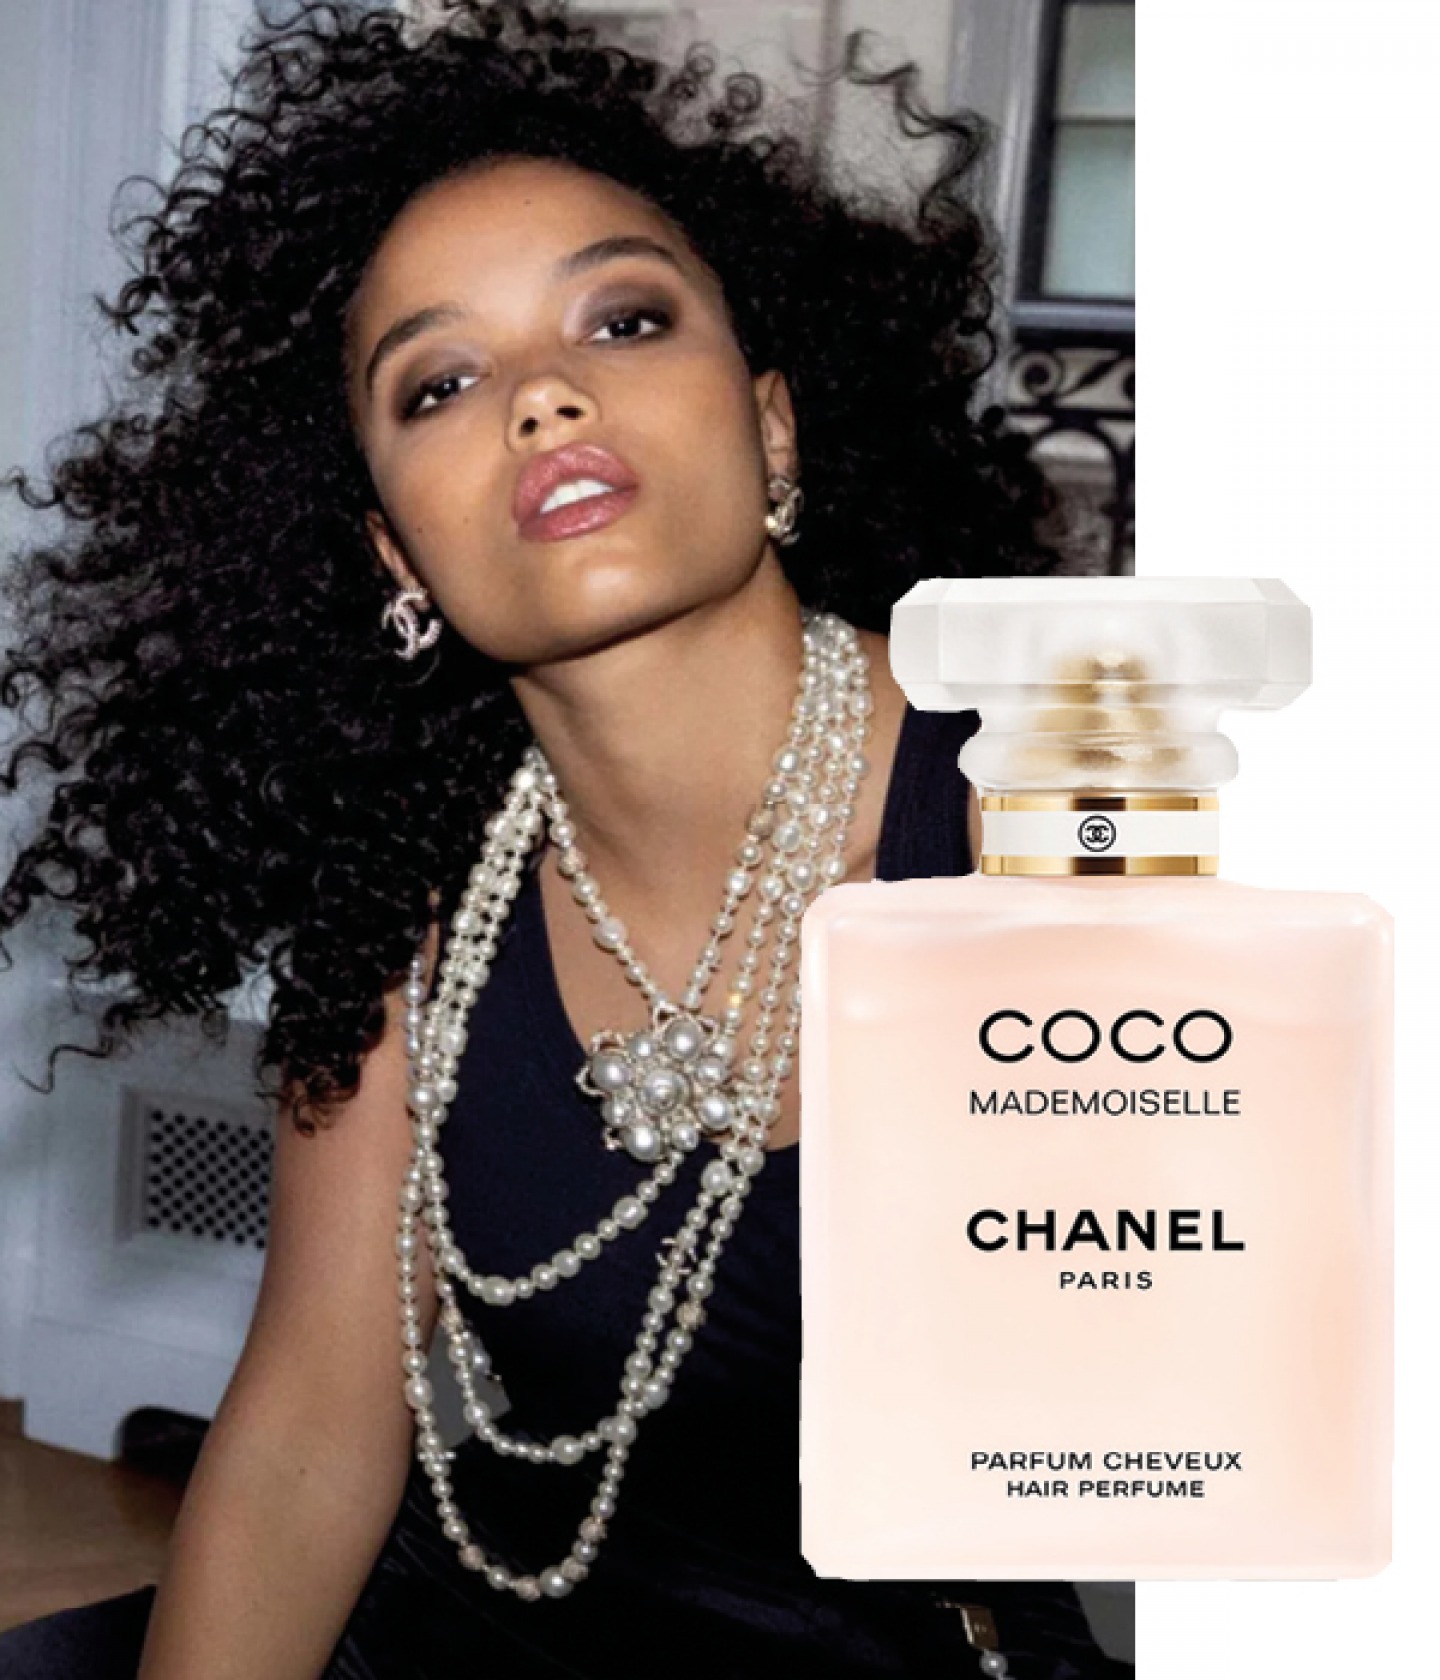 The new face of COCO MADEMOISELLE by CHANEL. - Smith & Caughey's